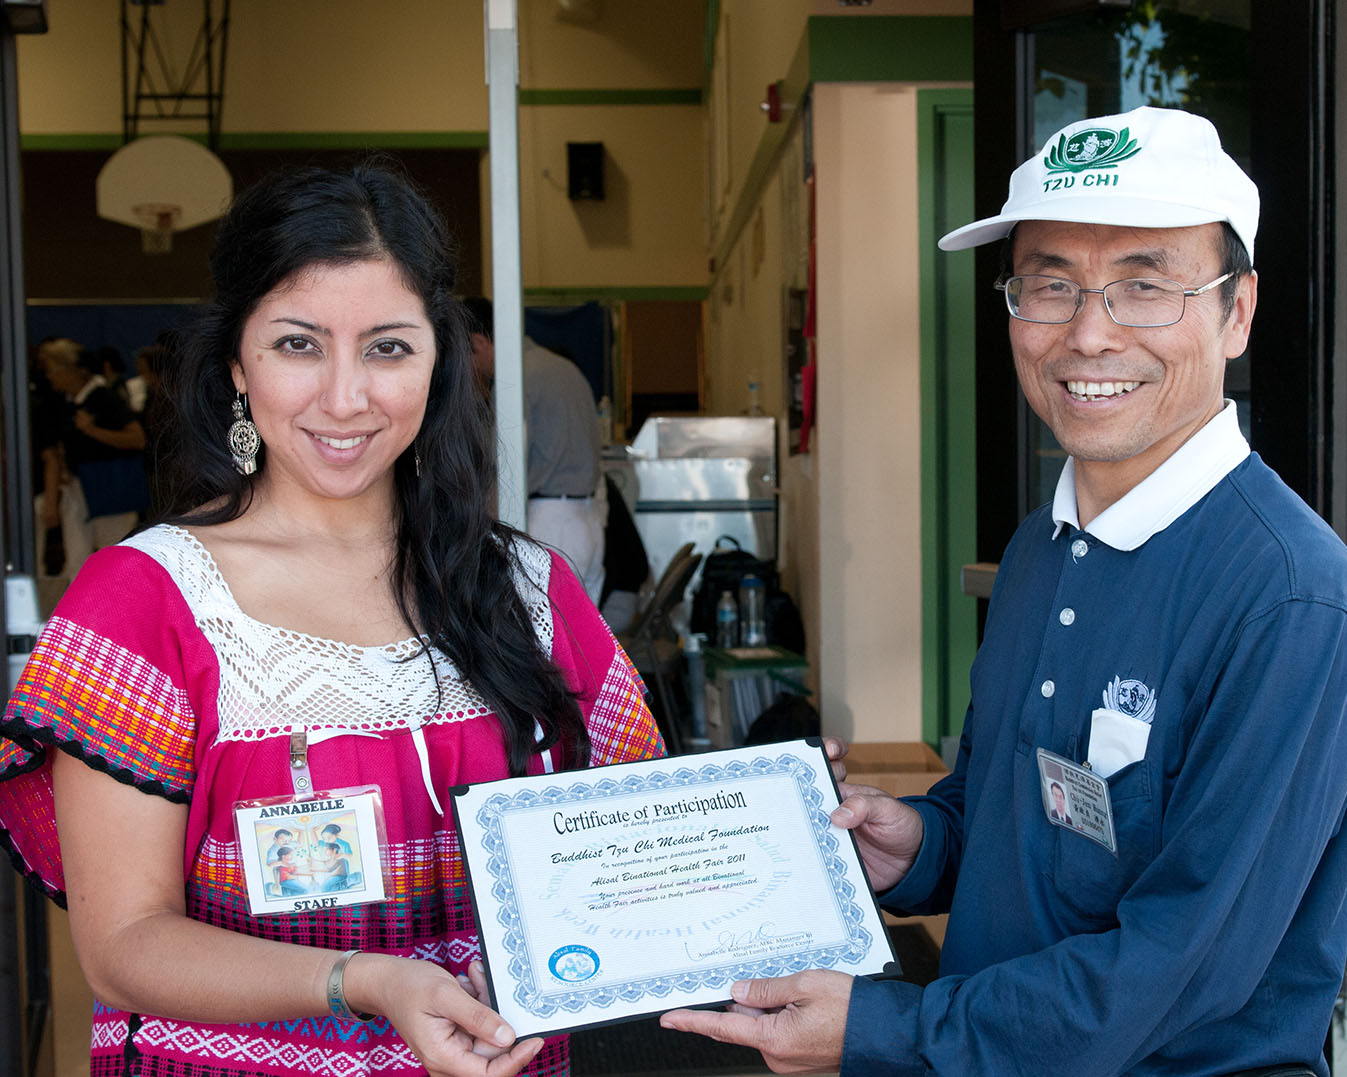 Binational Health Week event coordinator issued a certificate of thanks to Tzu Chi, and representative Chi-Jen Huang accepted it